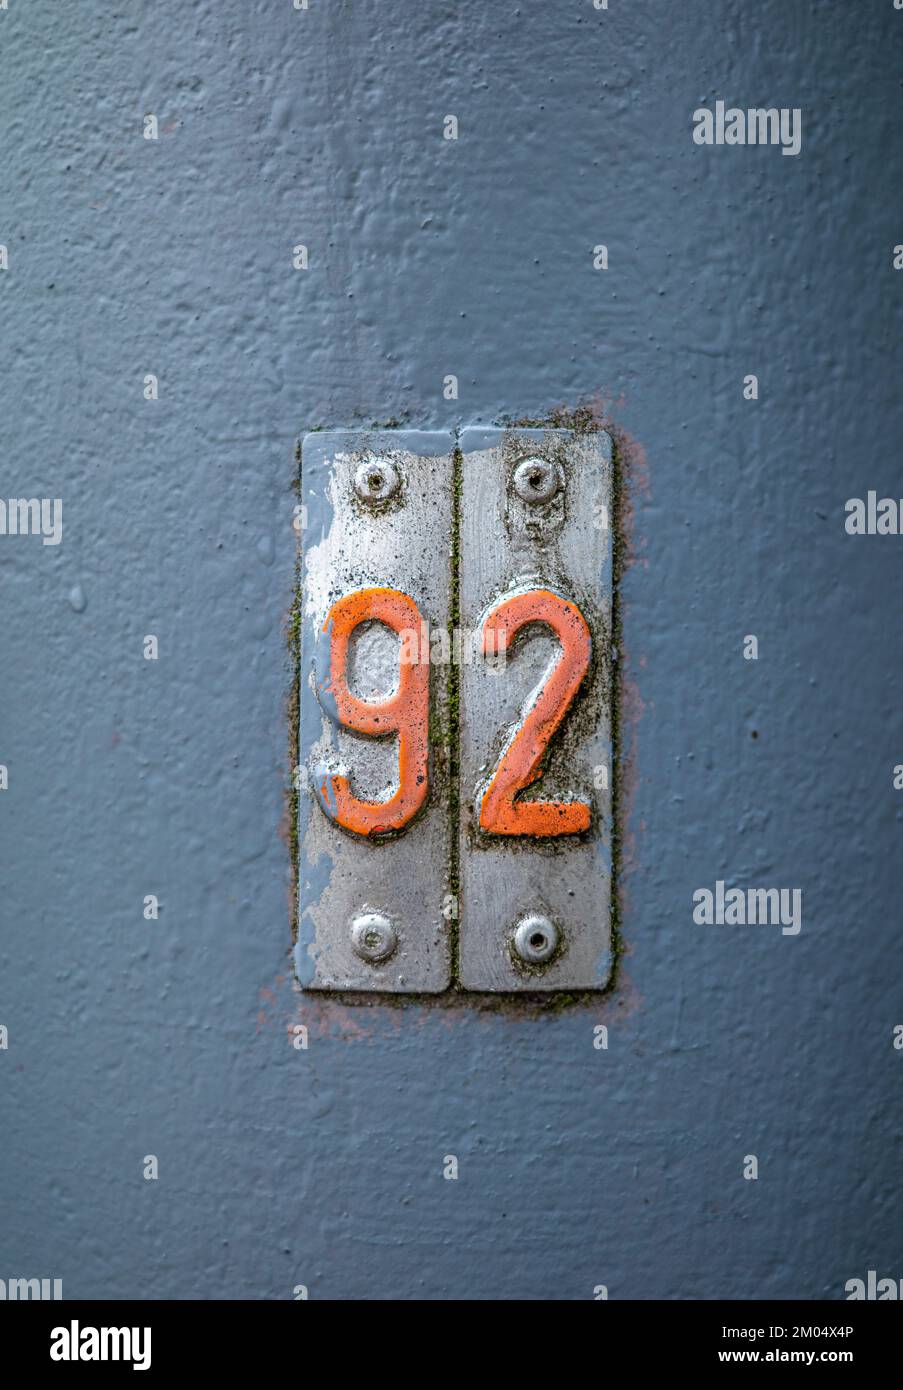 Orange number 92 on metal tiles on a gray background Stock Photo